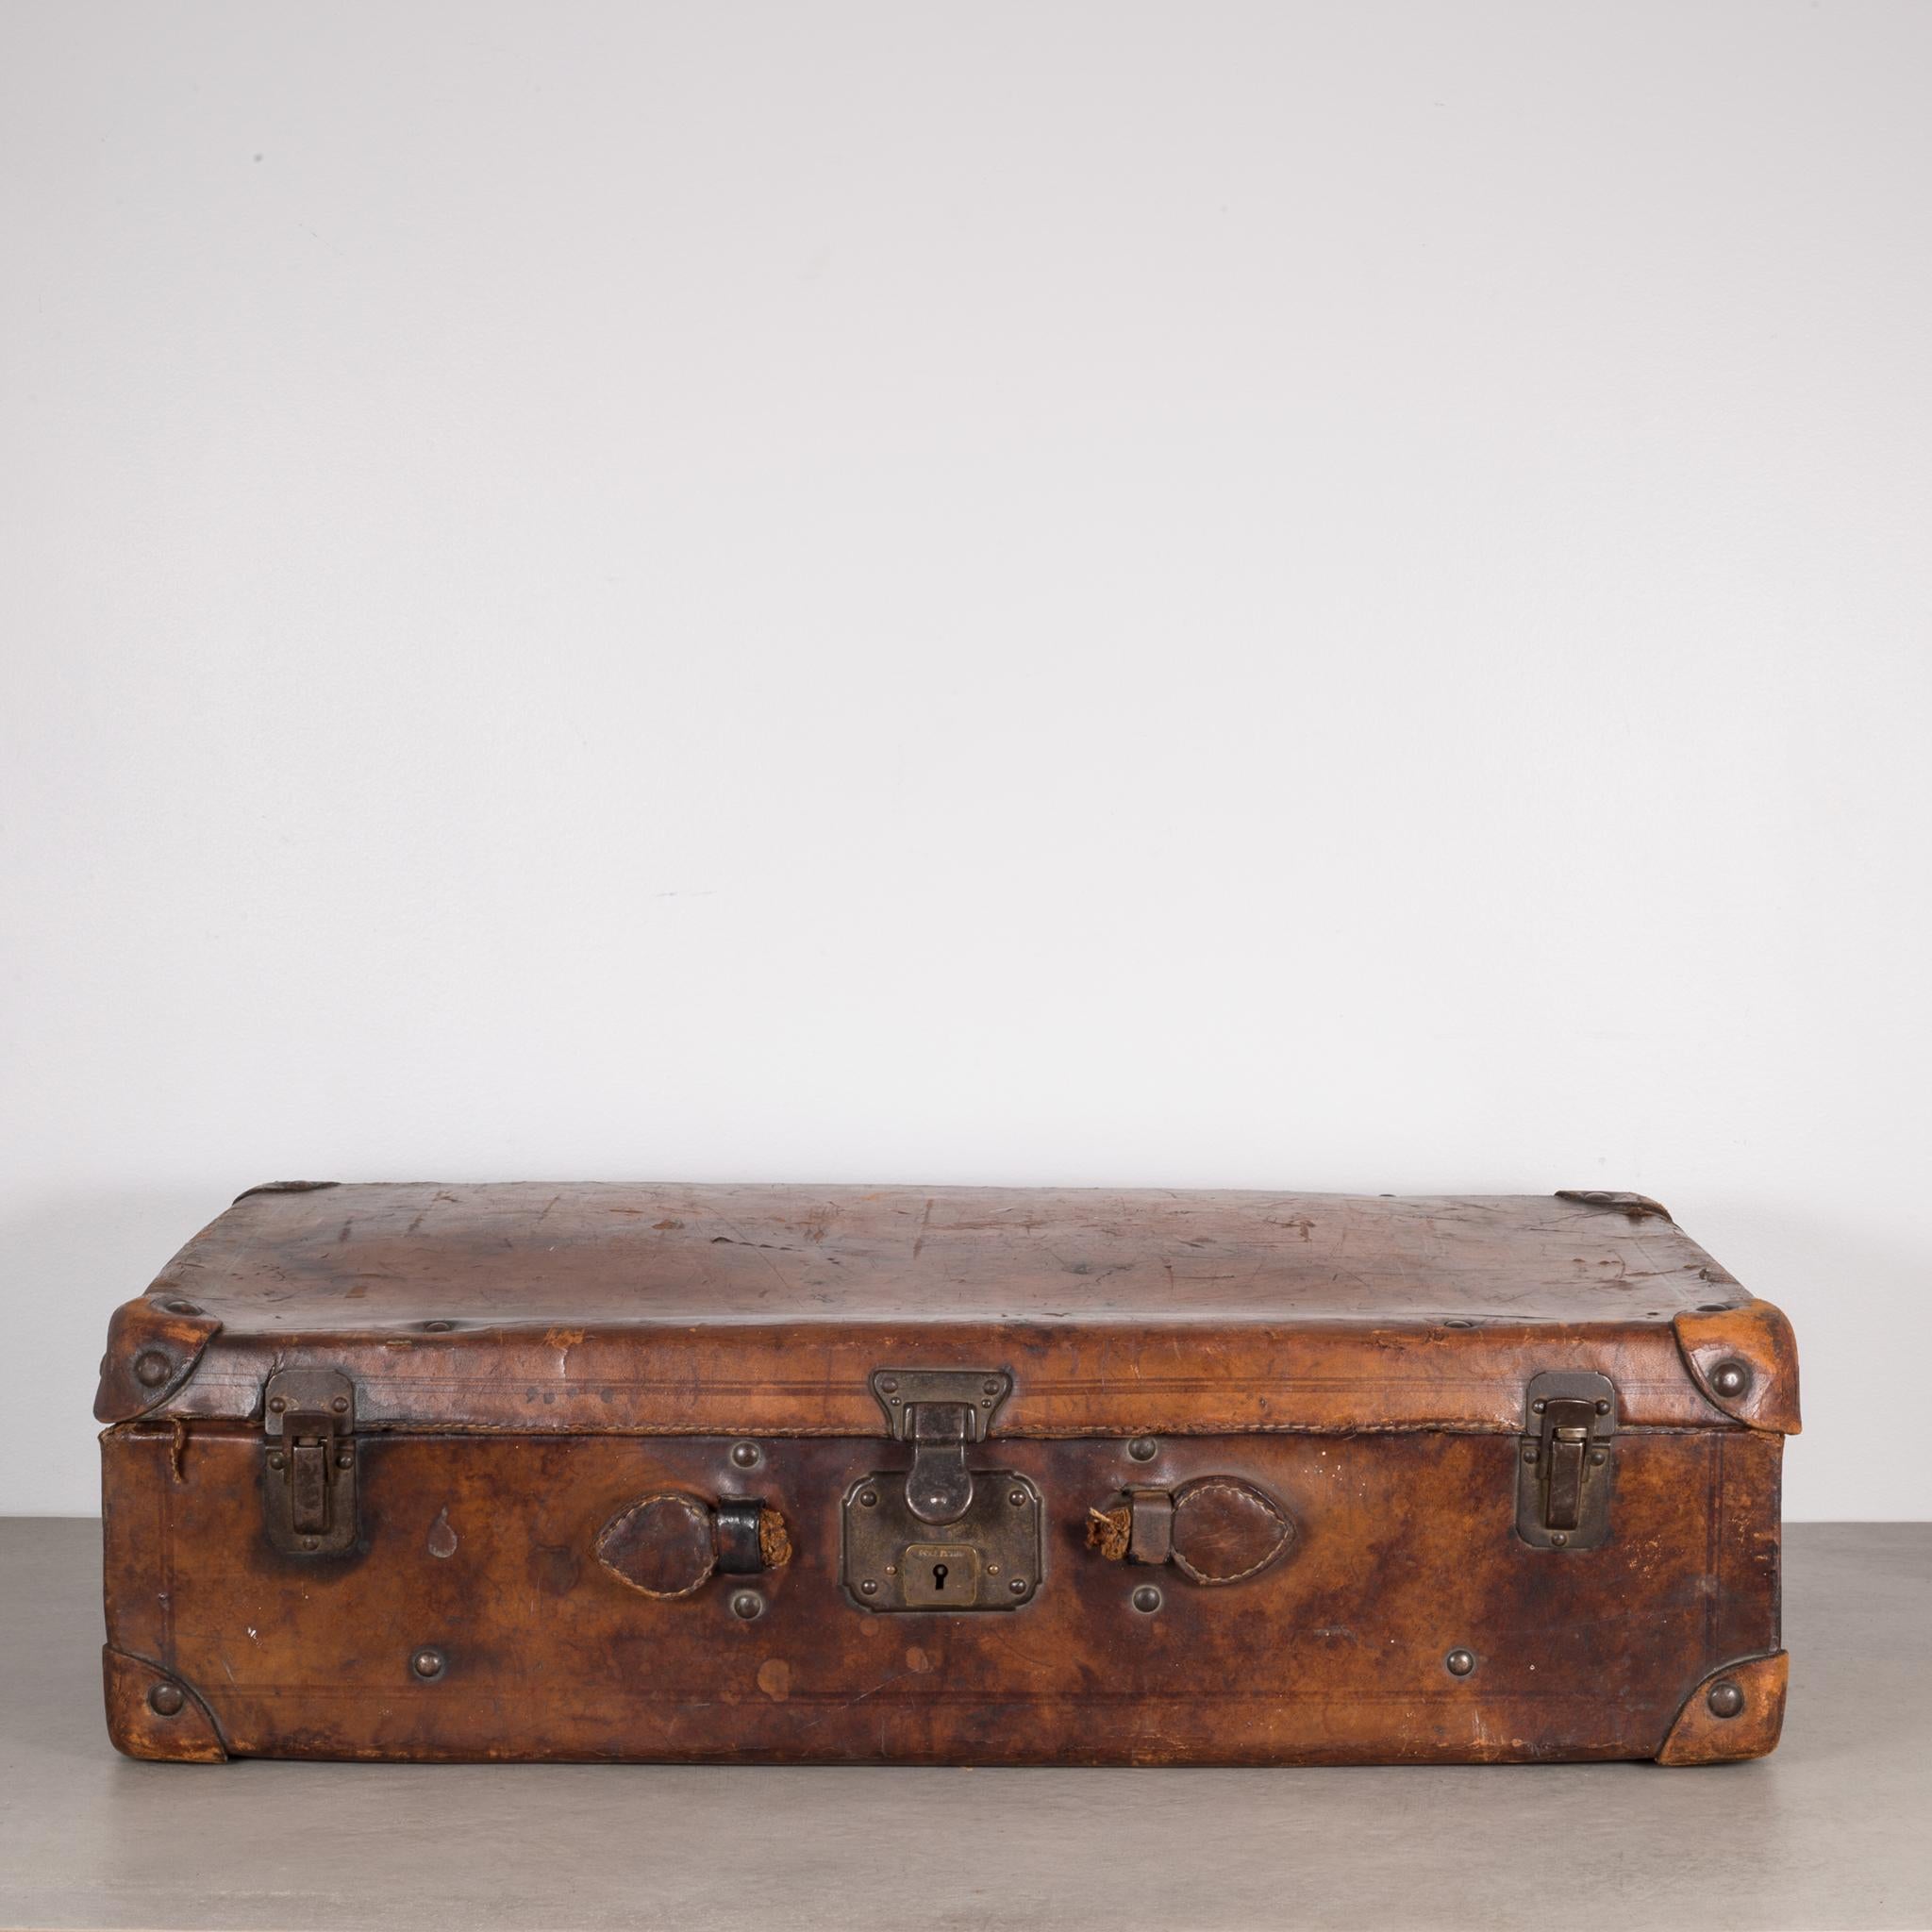 About

This is an all original leather trunk with brass accents. This piece has retain its original finish. Minor structural damage and minor loses.

Creator: Unknown.
Date of manufacture: circa 1940
Materials and techniques: